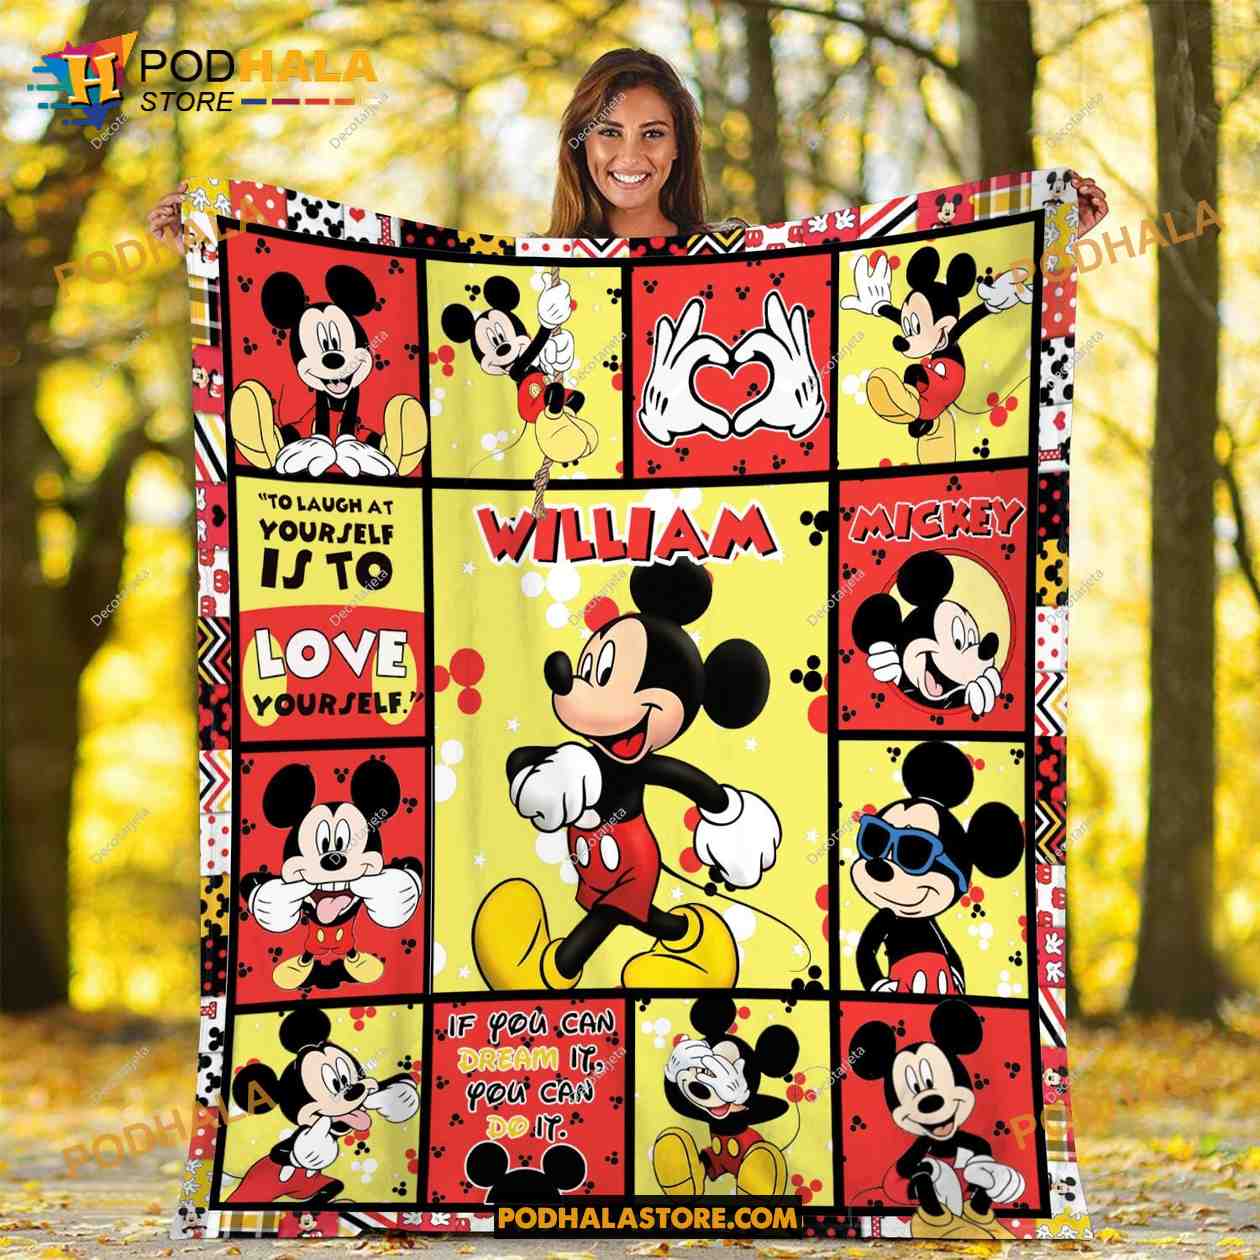 Custom Name Disney Mickey Mouse Blanket, Mickey Mouse Gifts For Adults -  Bring Your Ideas, Thoughts And Imaginations Into Reality Today